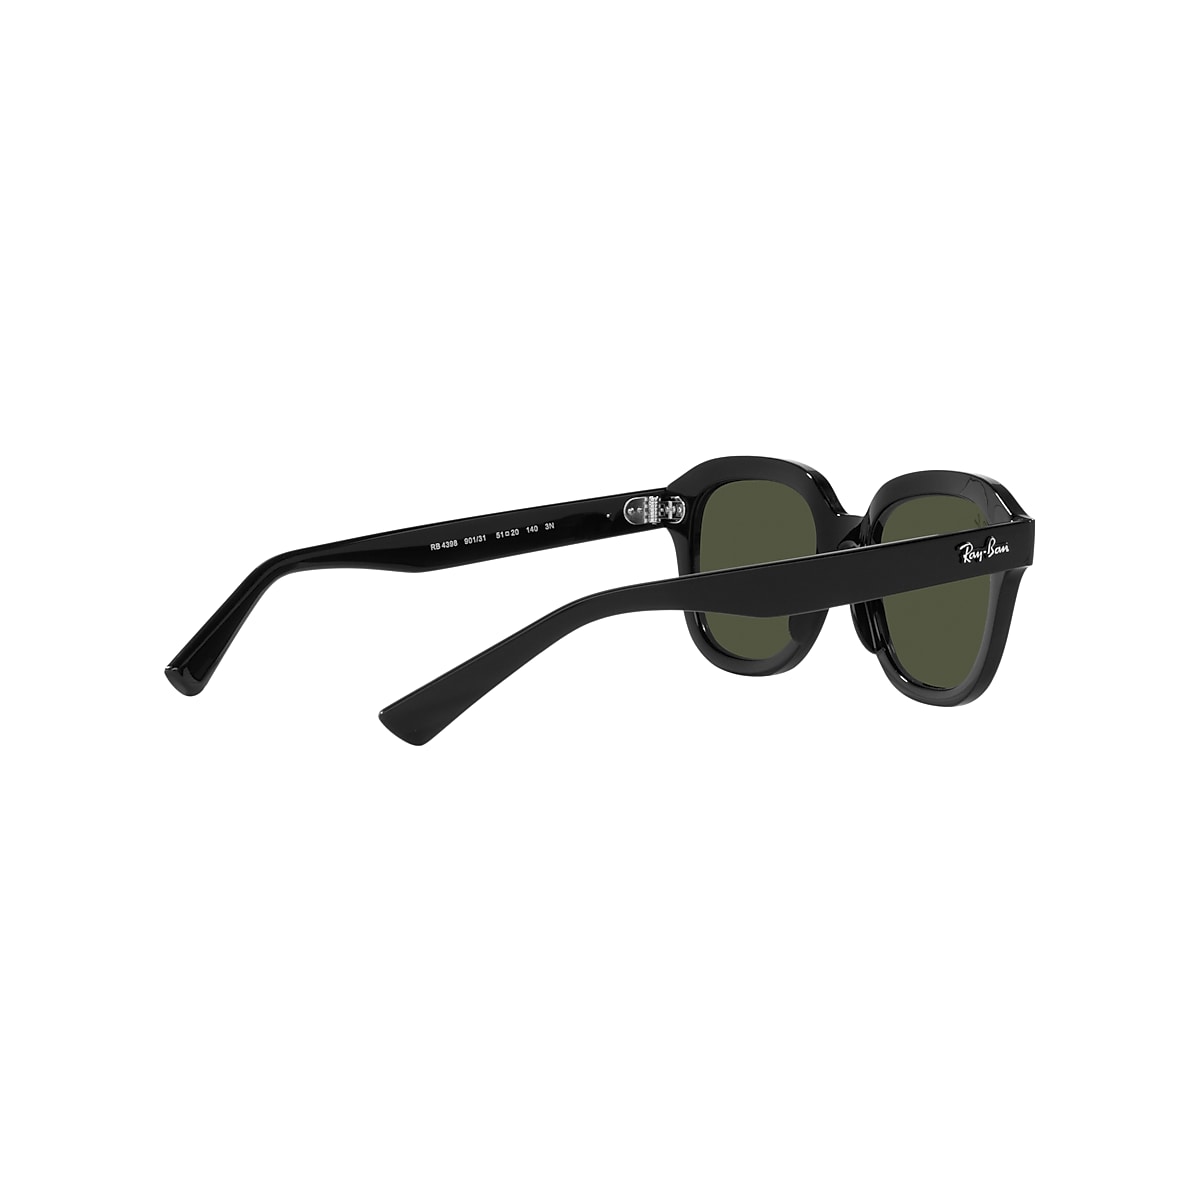 ERIK Sunglasses in Black and Green - RB4398F | Ray-Ban® US